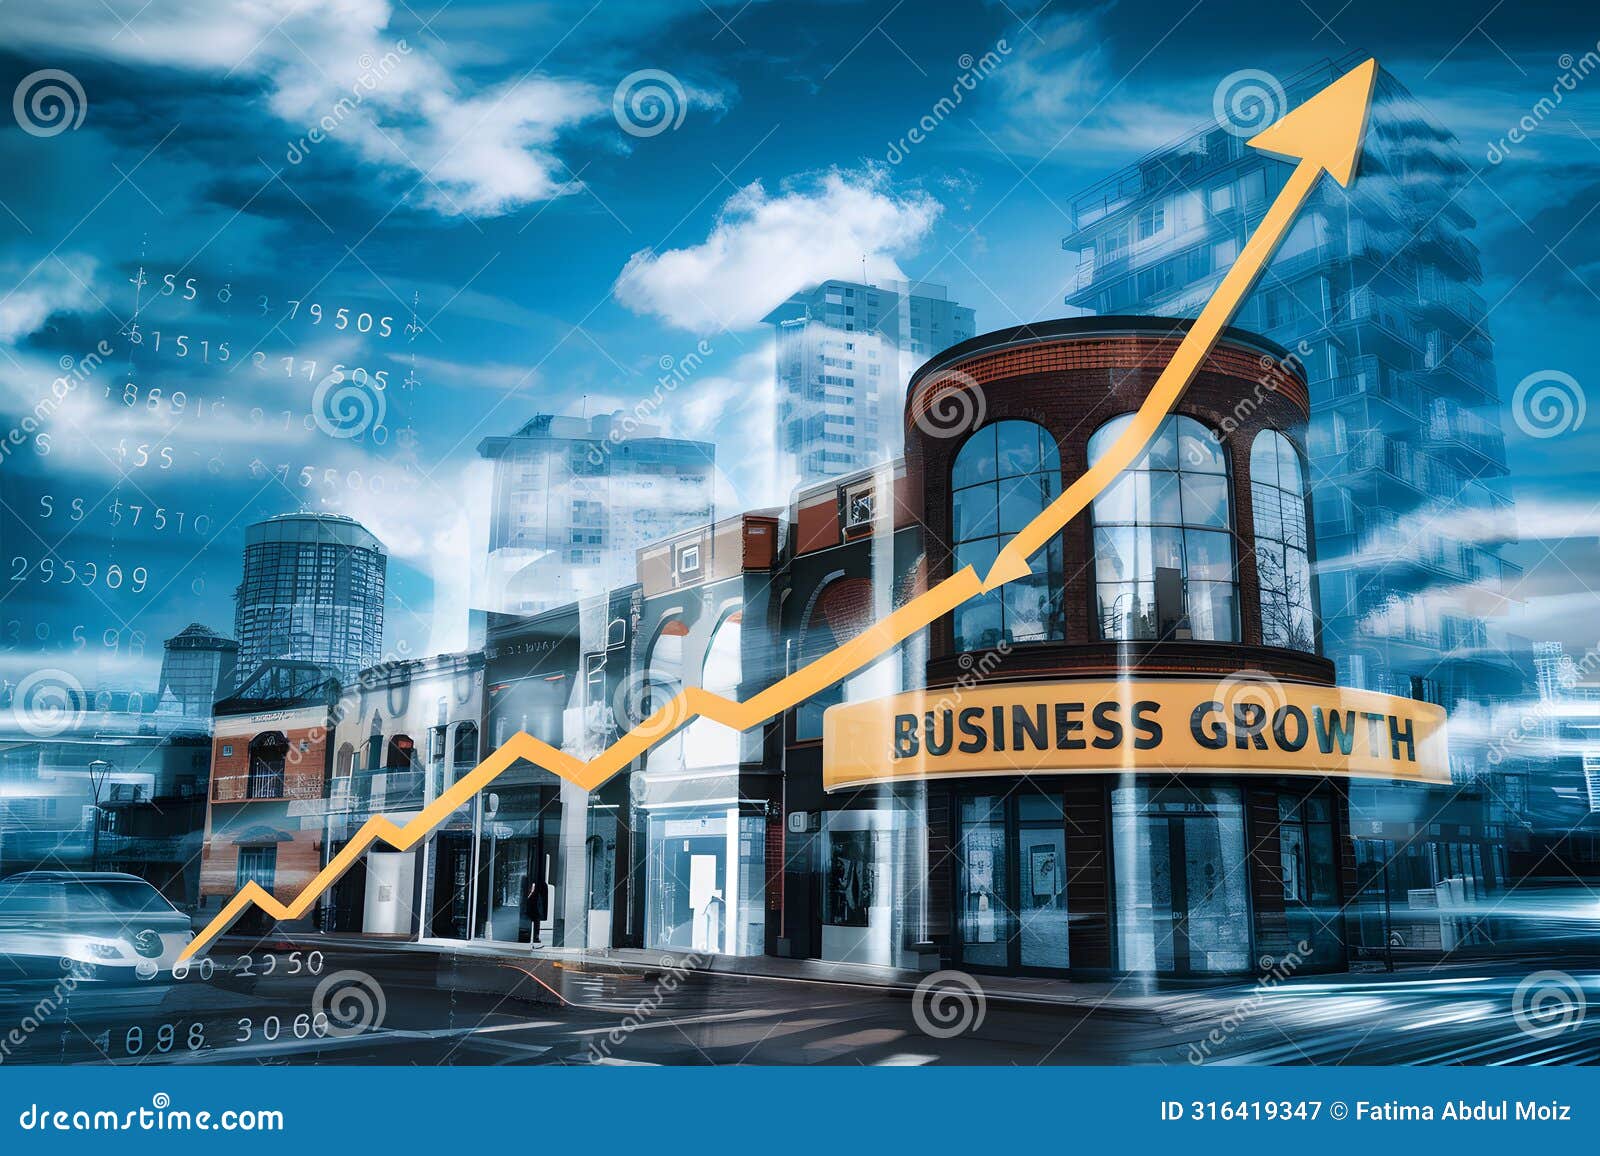 business growth  with storefronts, rising graph, and blue sky in urban setting